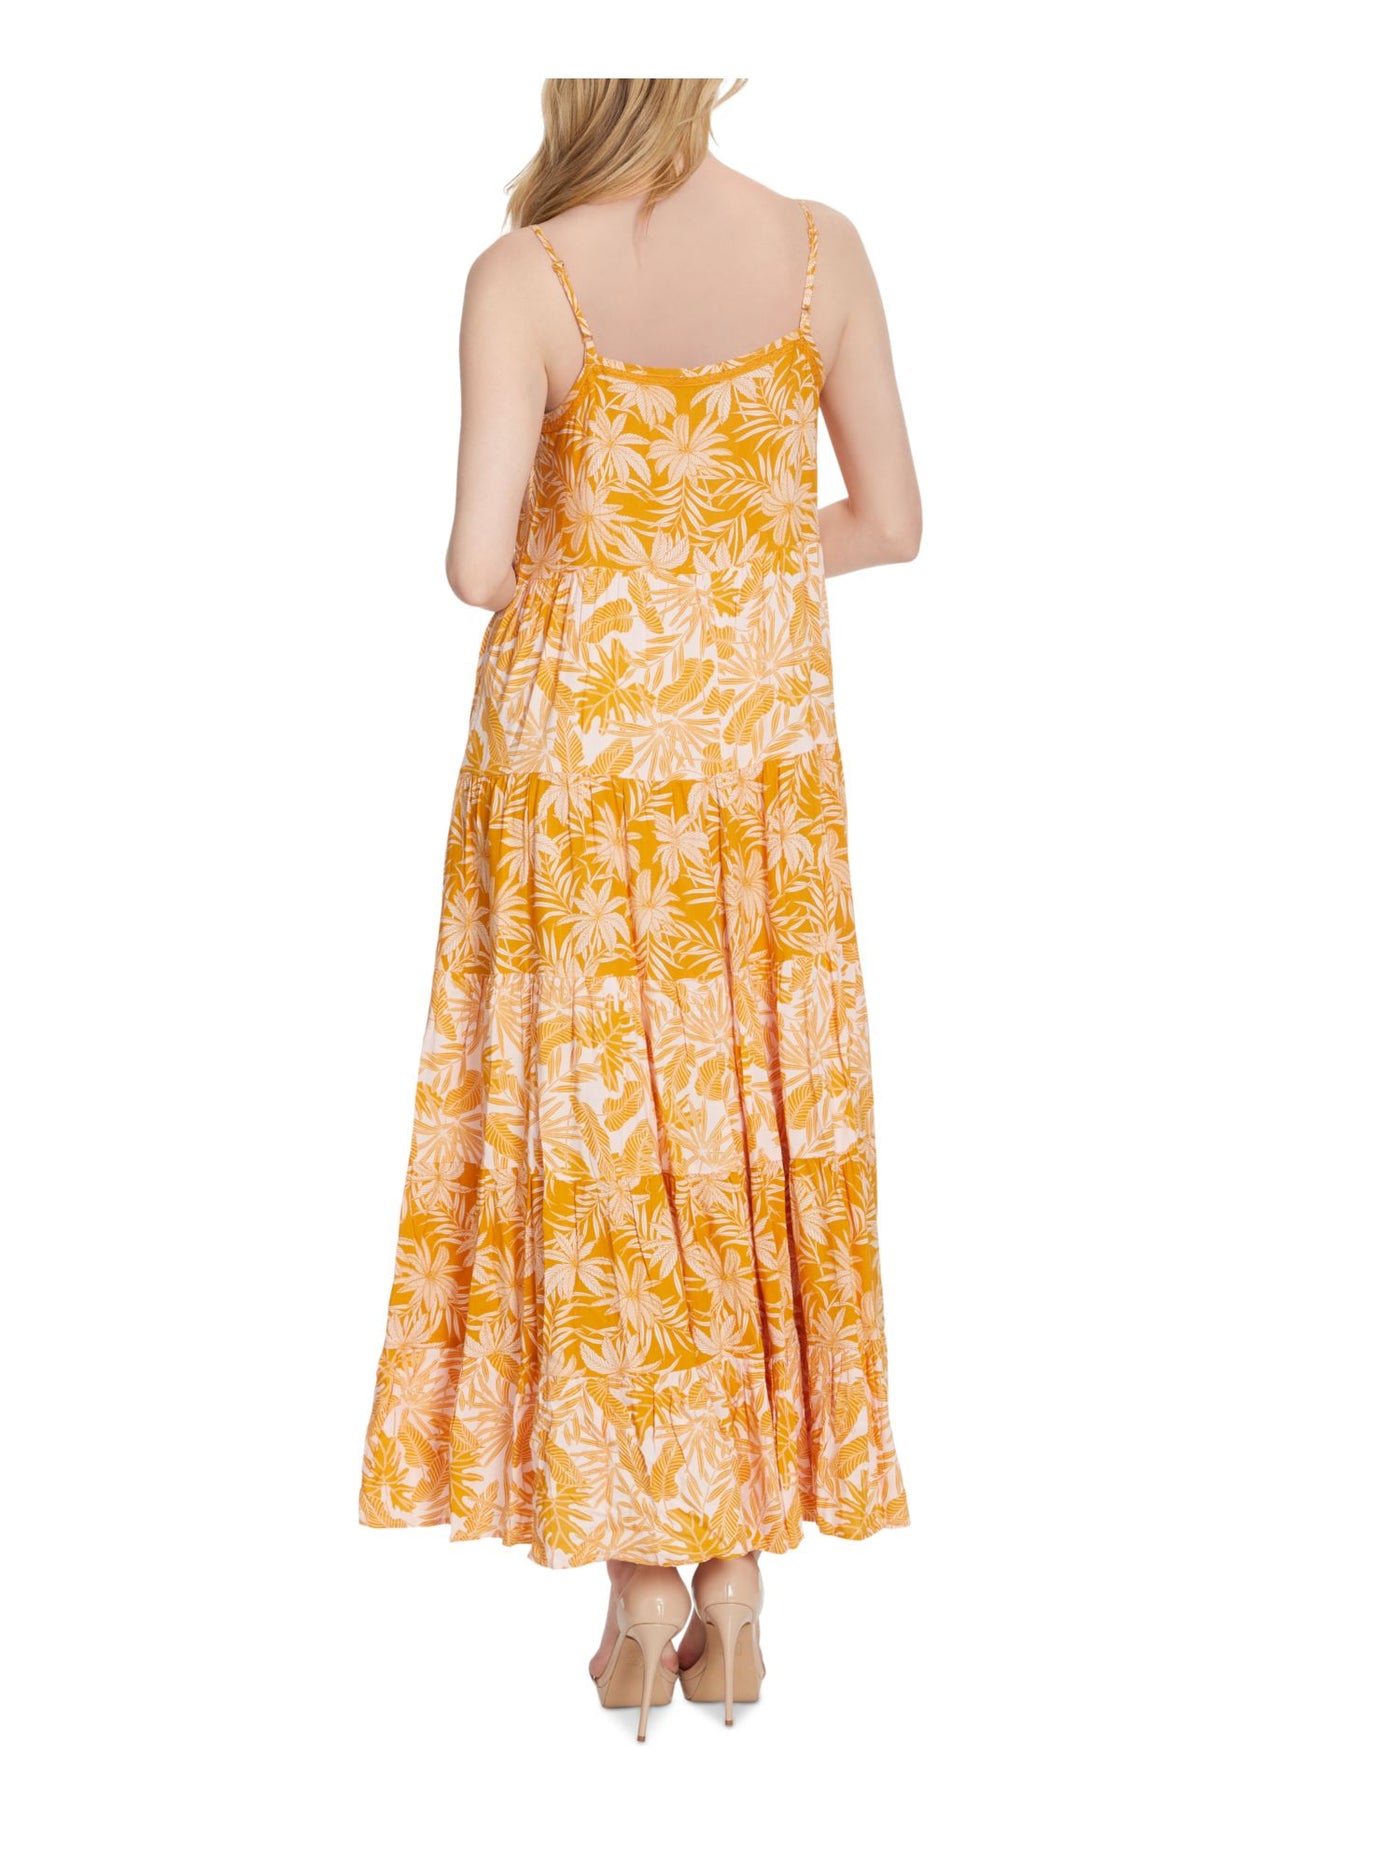 JESSICA SIMPSON Womens Yellow Pleated Button Front Top Tiered Printed Spaghetti Strap Scoop Neck Maxi Fit + Flare Dress M